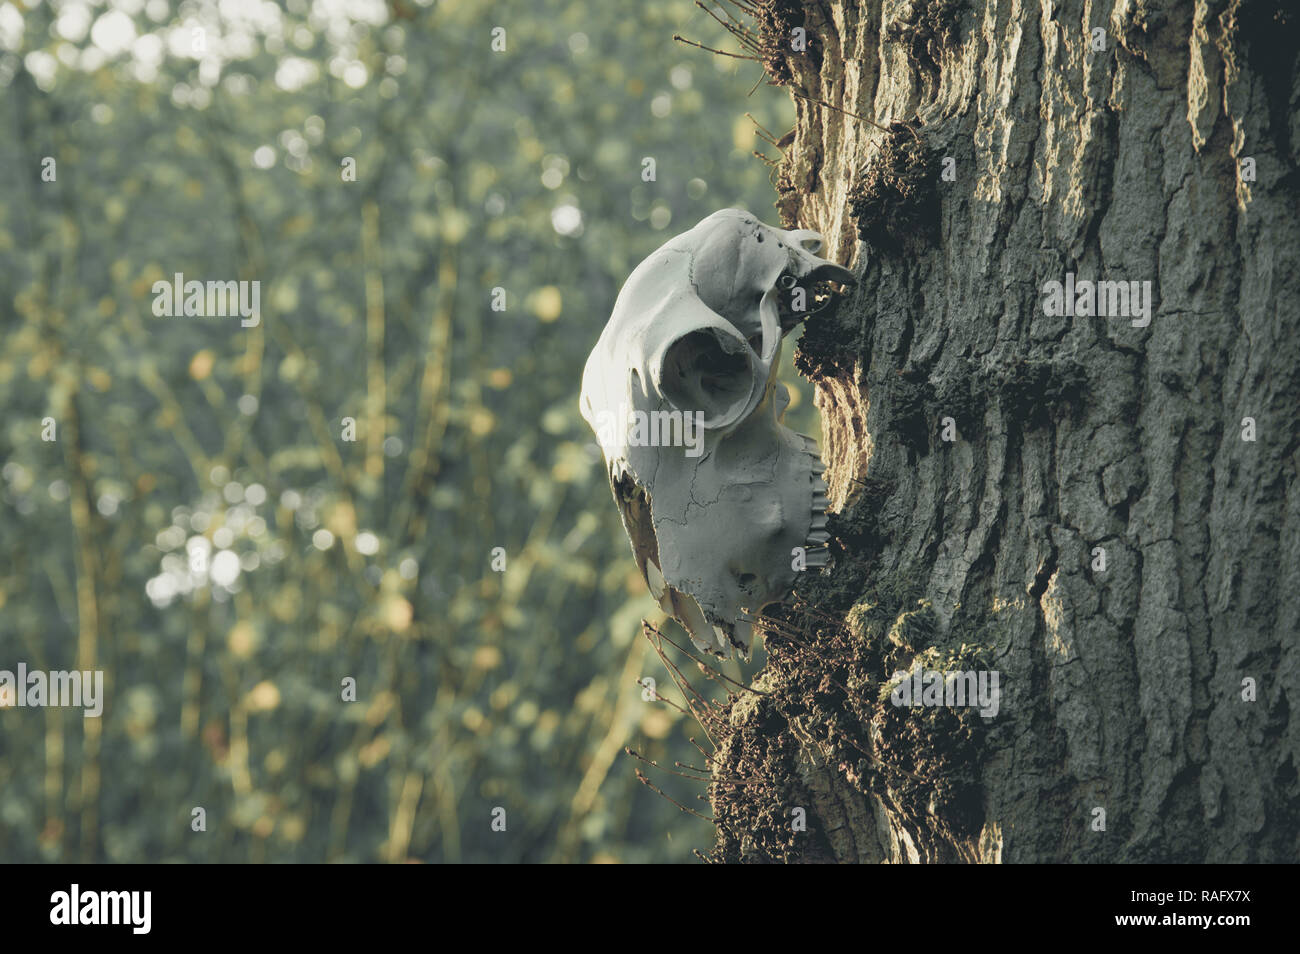 A sheep skull hanging from a tree trunk, with a blurred bokeh background. With amuted edit. Stock Photo